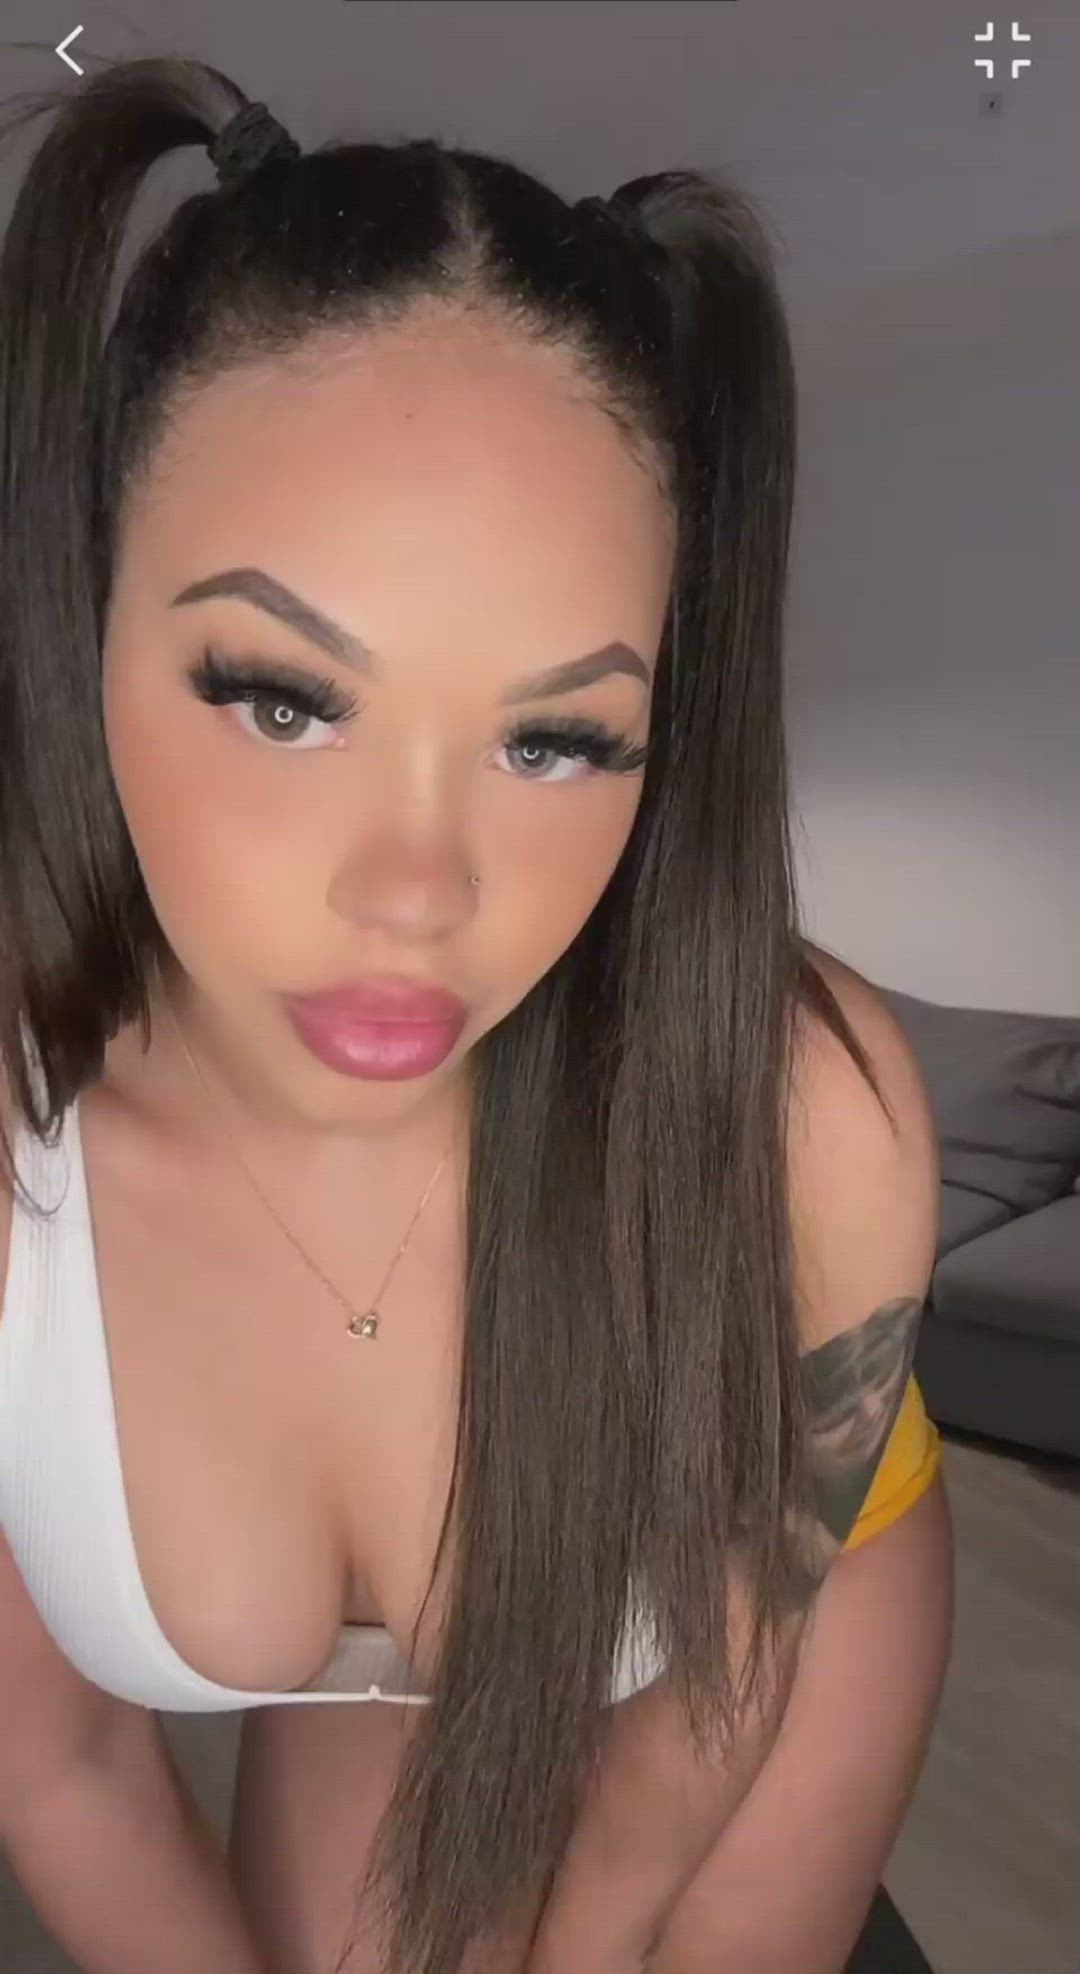 Curvy porn video with onlyfans model Briana✨ <strong>@brianamonique</strong>